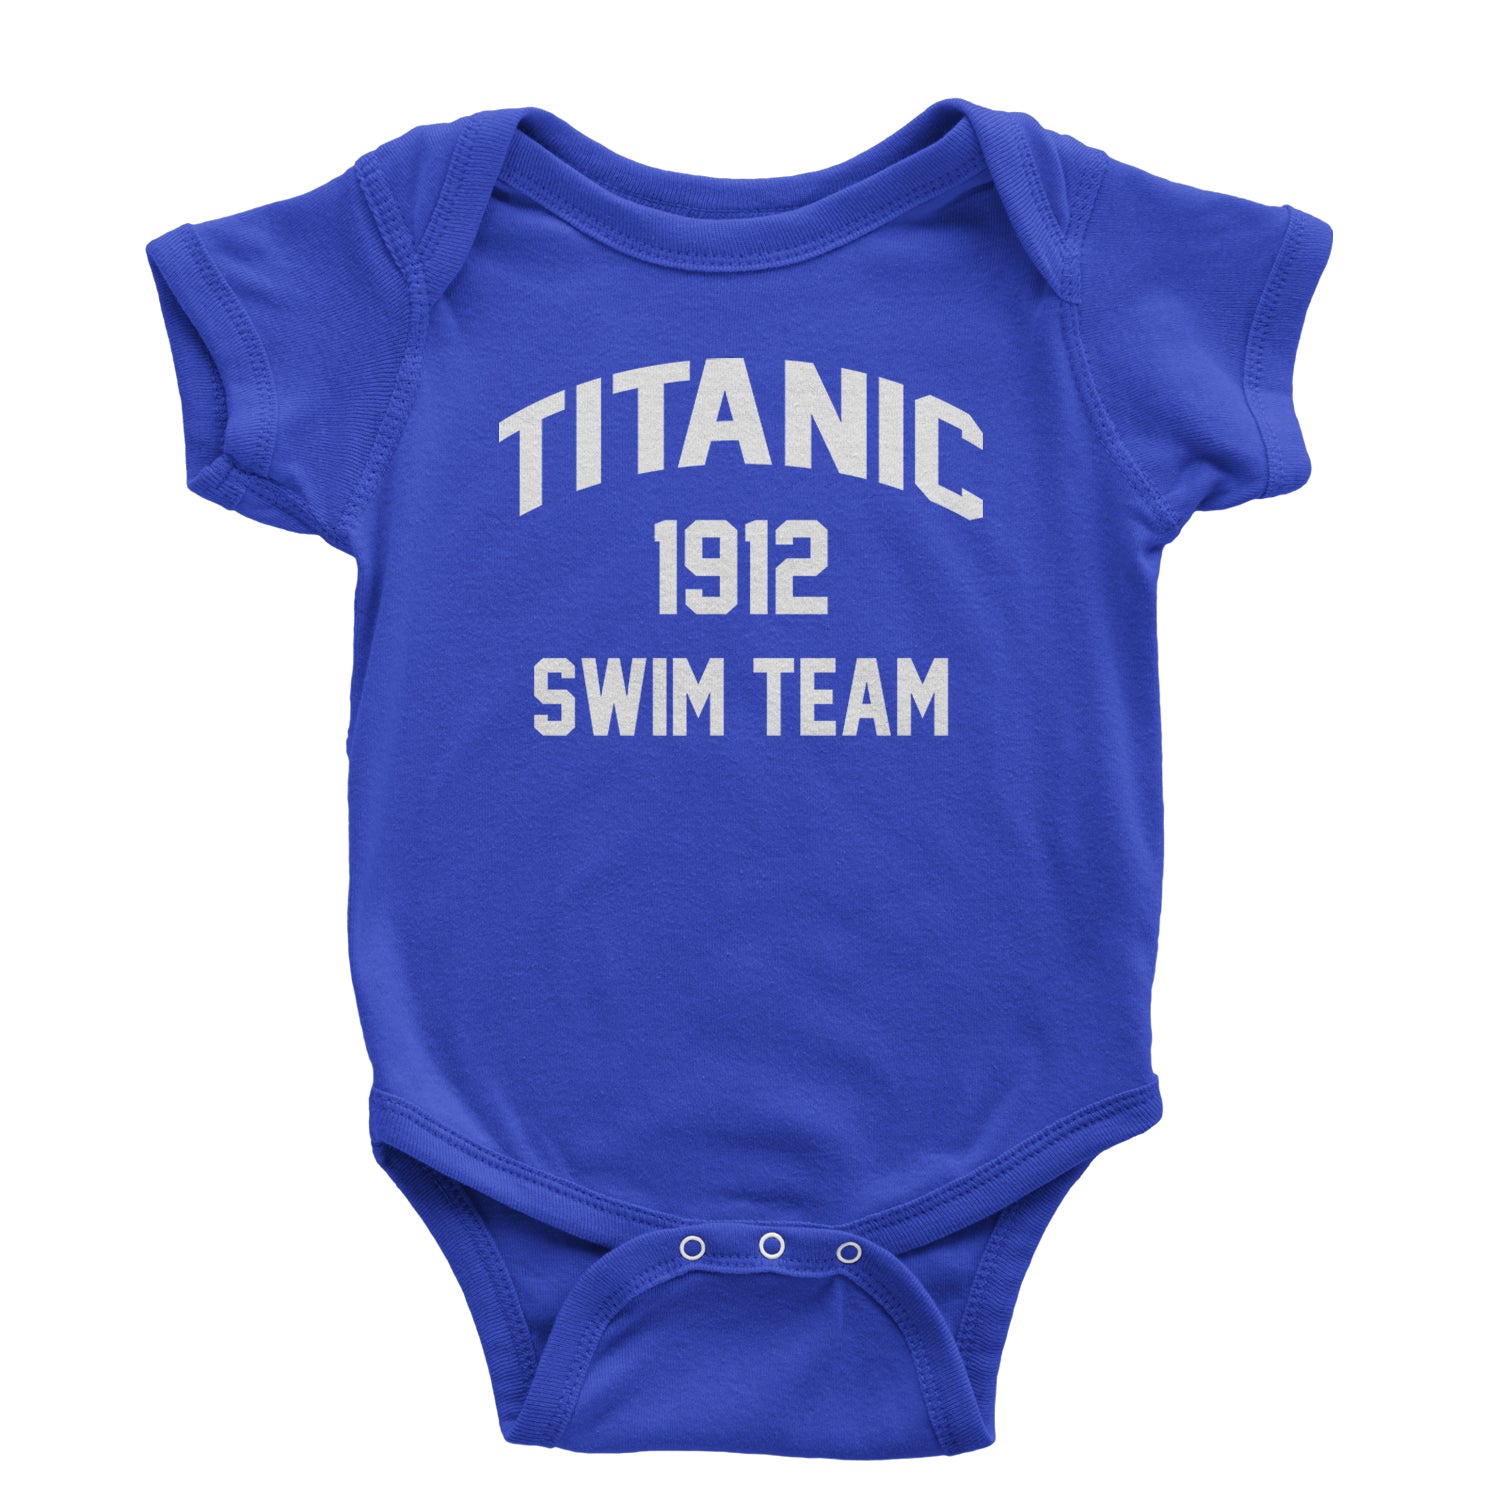 Titanic Swim Team 1912 Funny Cruise Infant One-Piece Romper Bodysuit and Toddler T-shirt